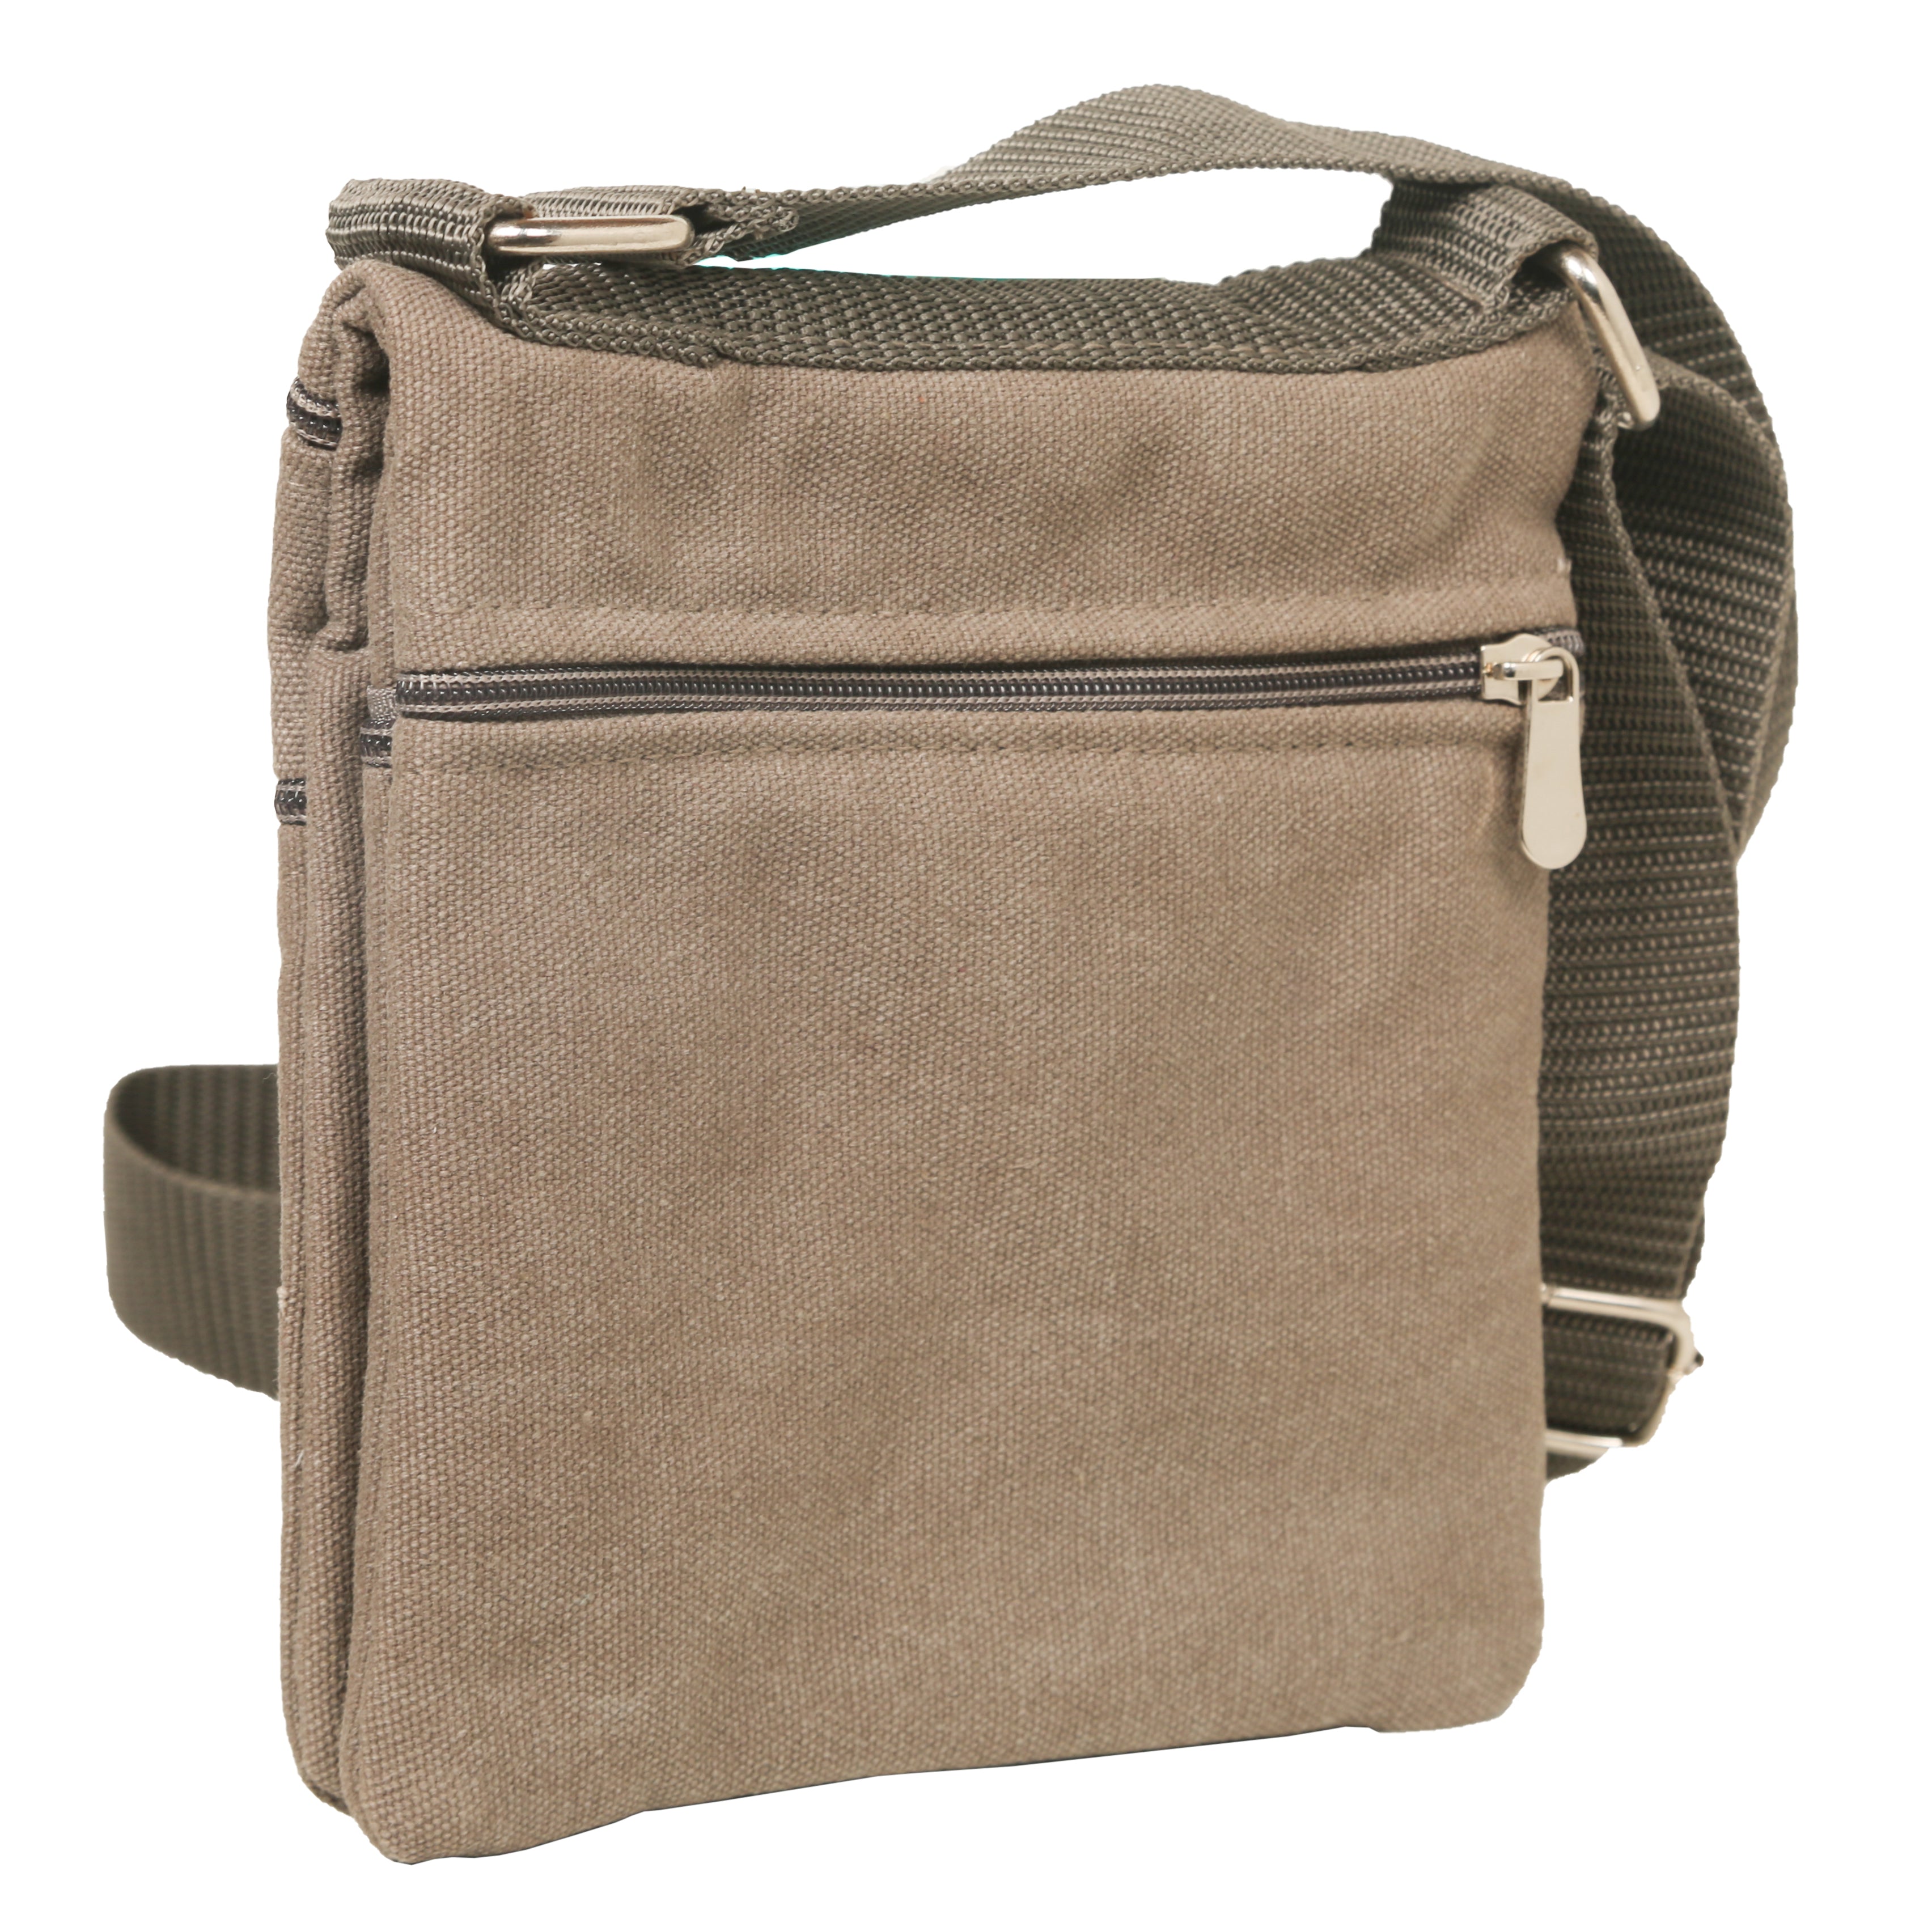 Waxed canvas sling bag / fanny pack / chest bag with leather shoulder strap  | Treesizeverse